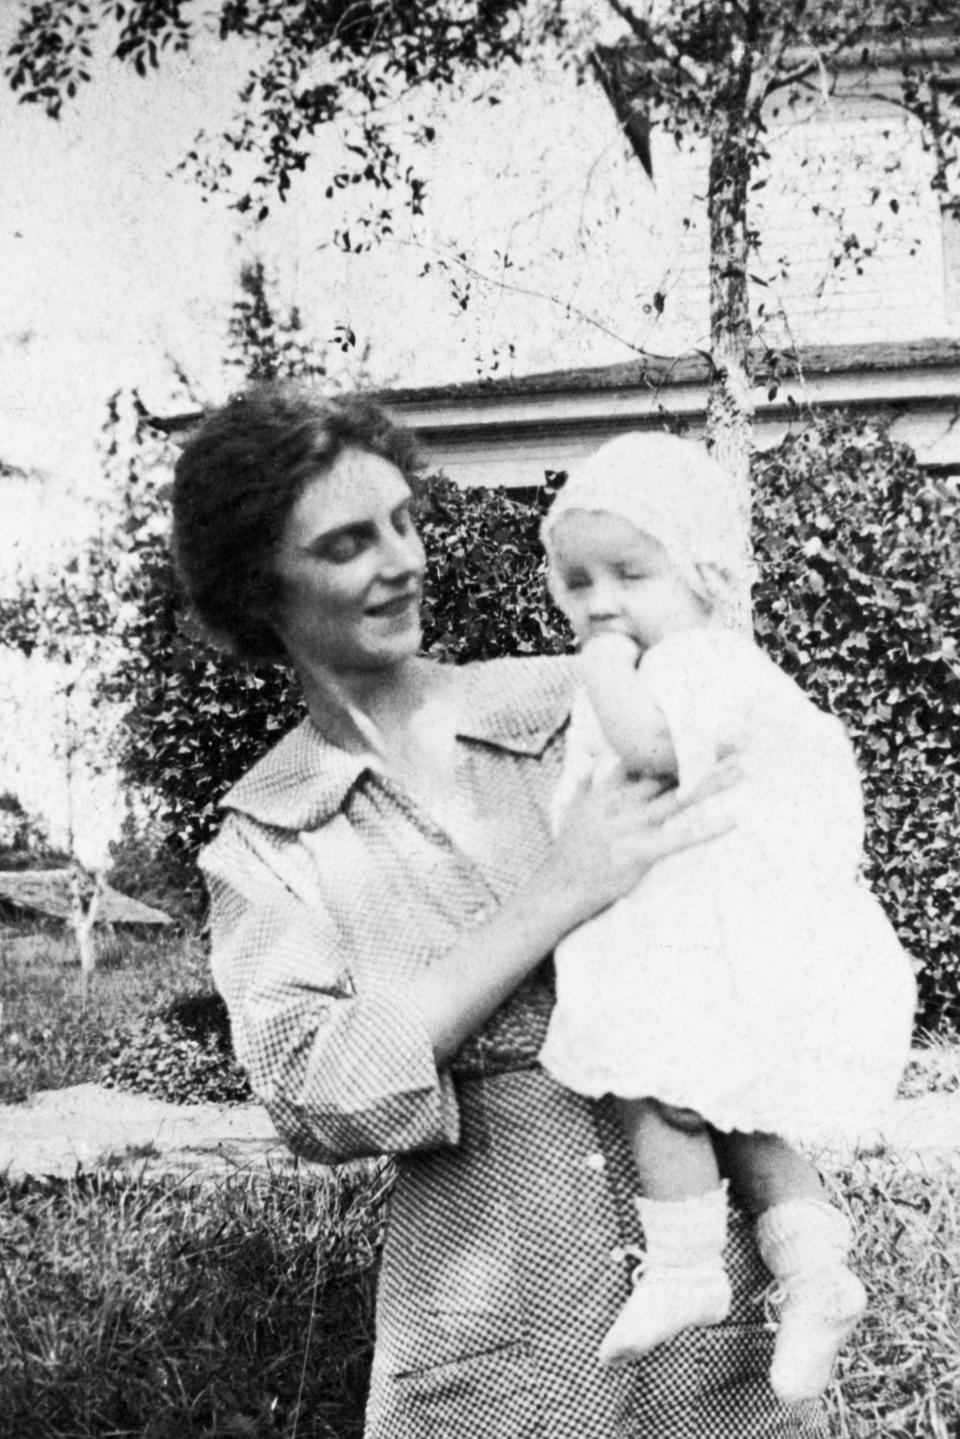 Future evangelist Billy Graham at six months old in this photograph with his mother, Mrs. Morrow Graham. He was born on&nbsp;Nov. 7, 1918, and&nbsp;christened William Franklin Graham, Jr.